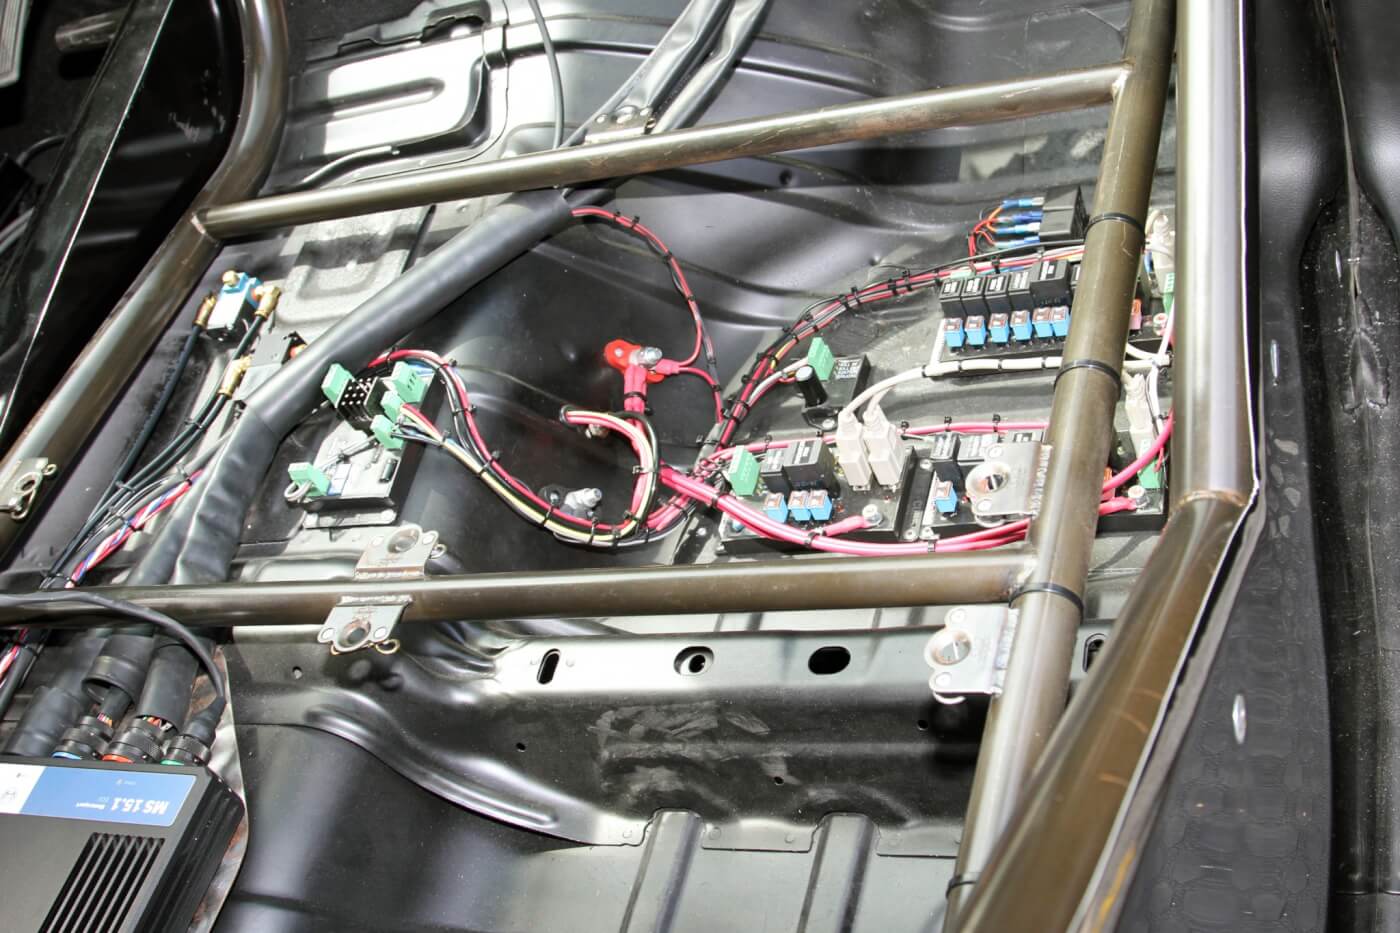 The Spaghetti Menders wiring harness and Bosch ECU combine to handle all electronic controls in the truck, including the engine, transmission and staging system, as well as other functions like shifting.